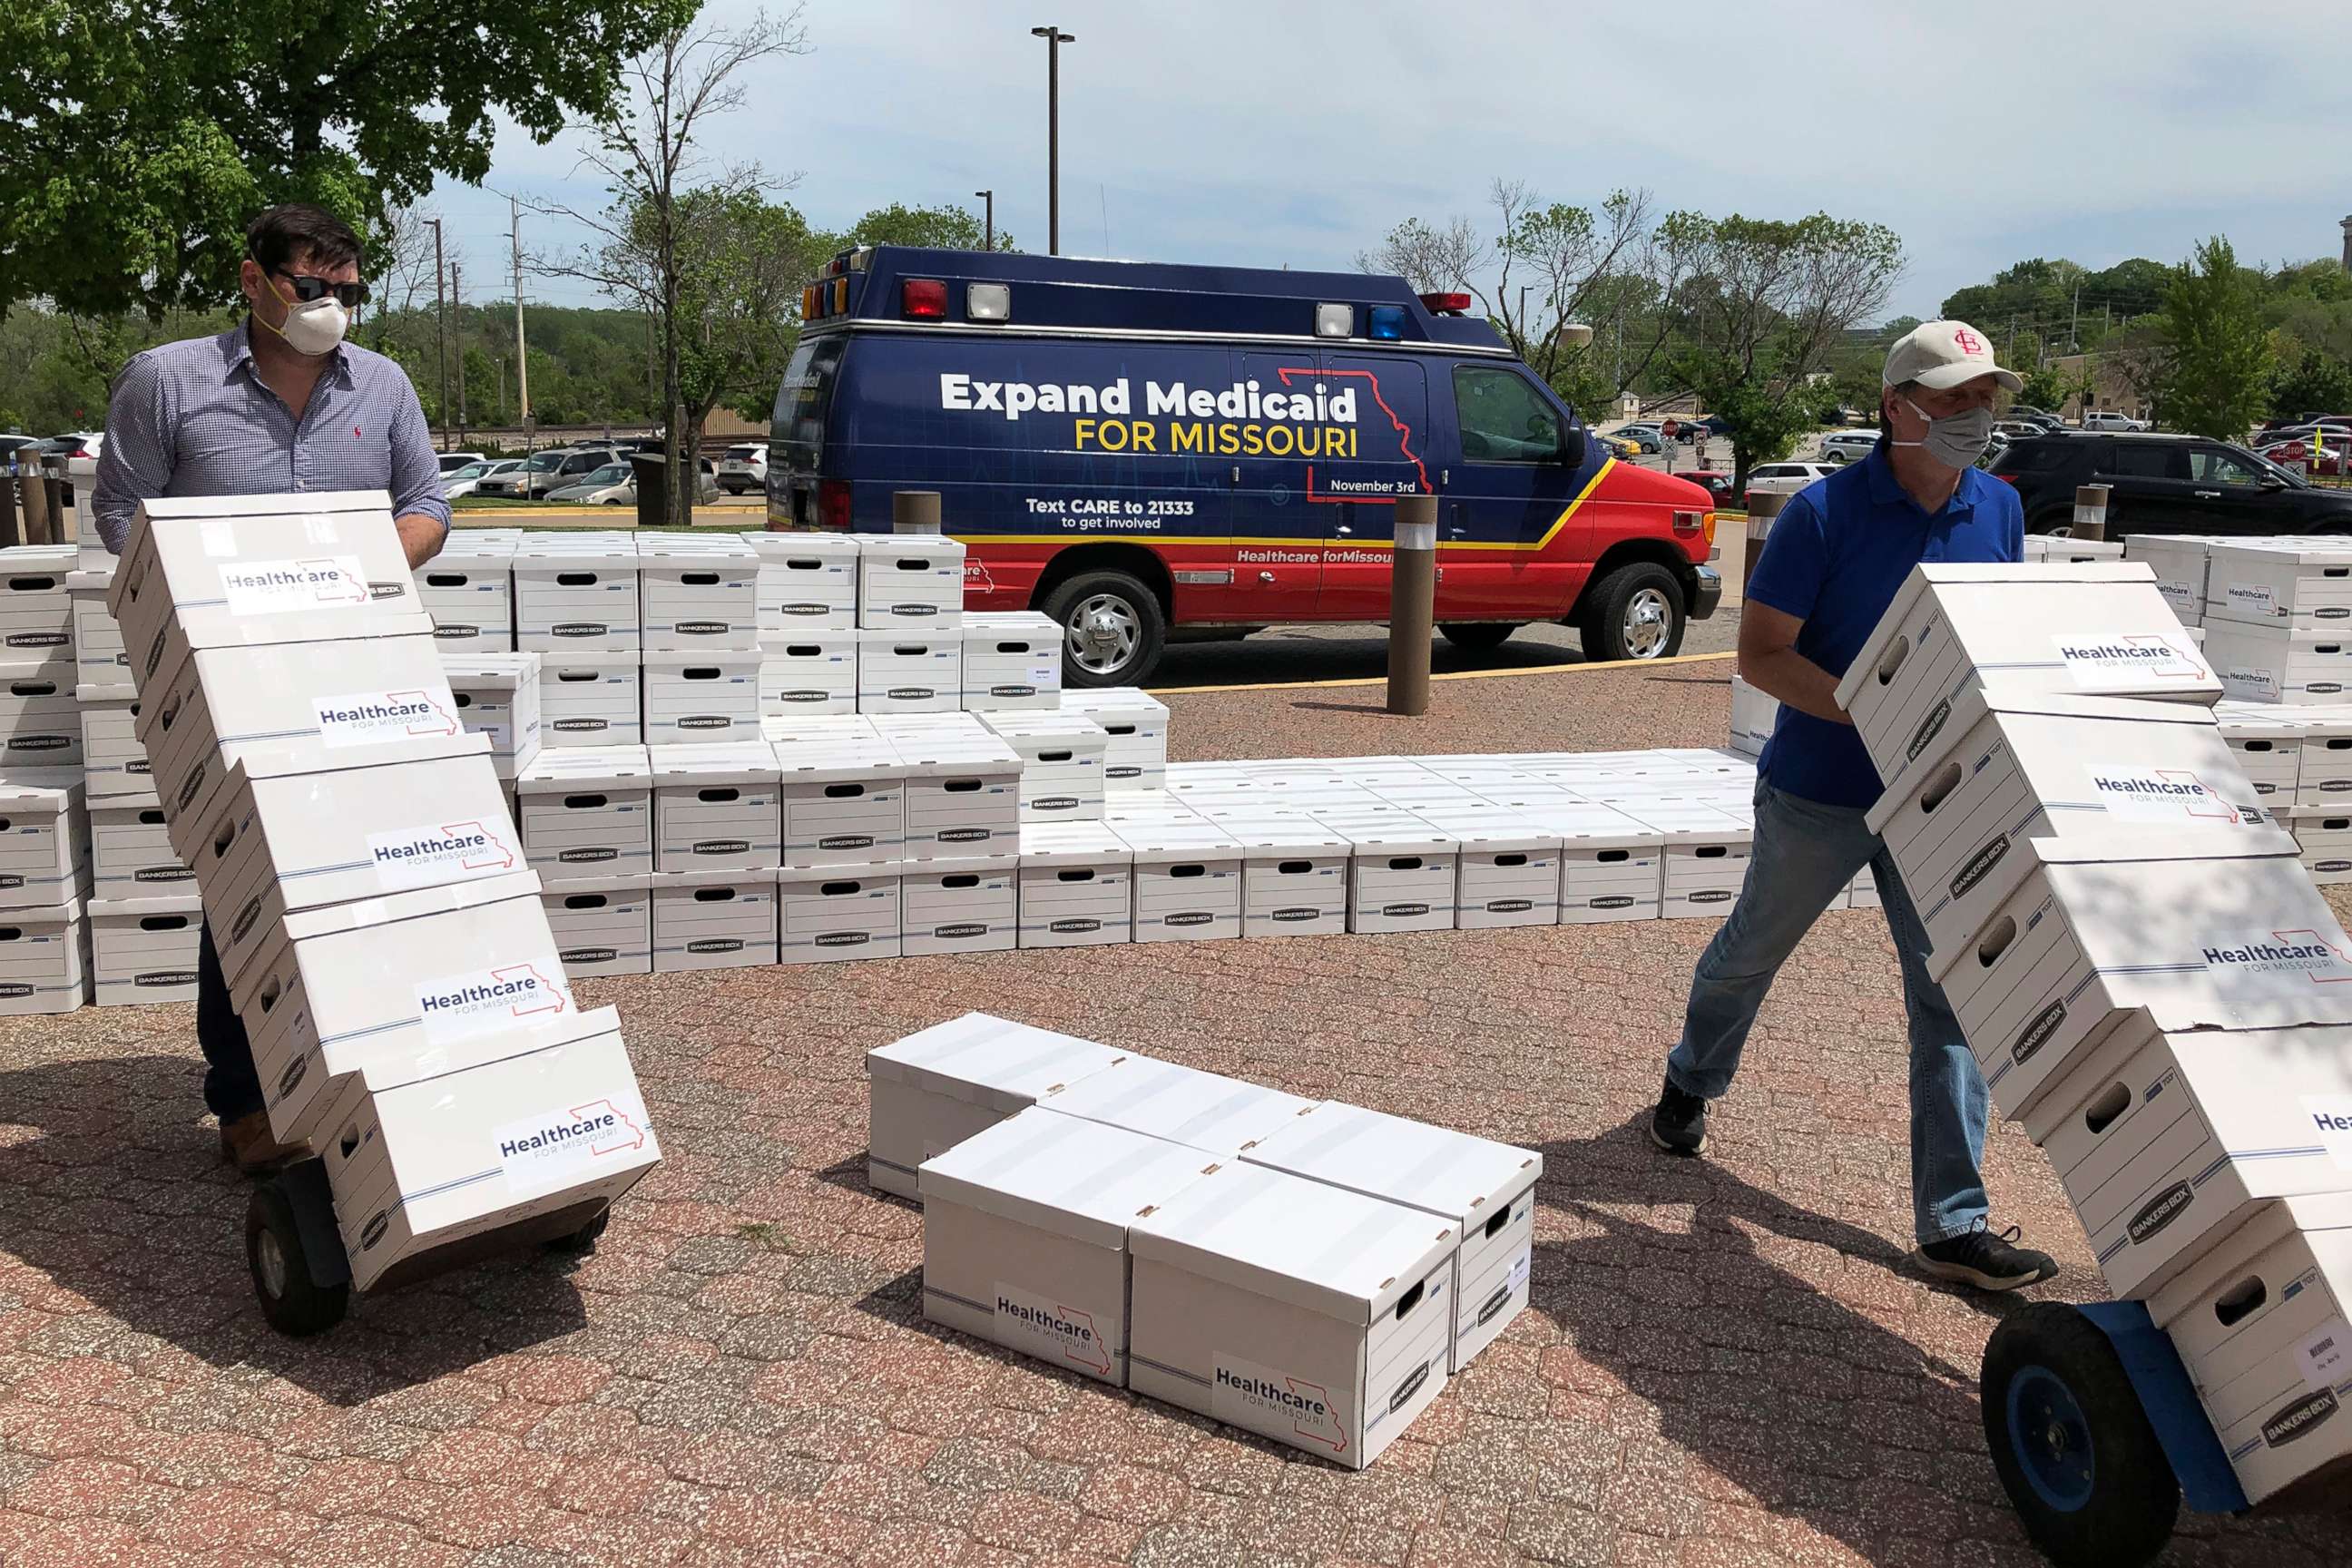 PHOTO: Campaign workers David Woodruff, left, and Jason White, right, deliver boxes of initiative petitions signatures to the Missouri secretary of state's office in Jefferson City, Mo., May 1, 2020.